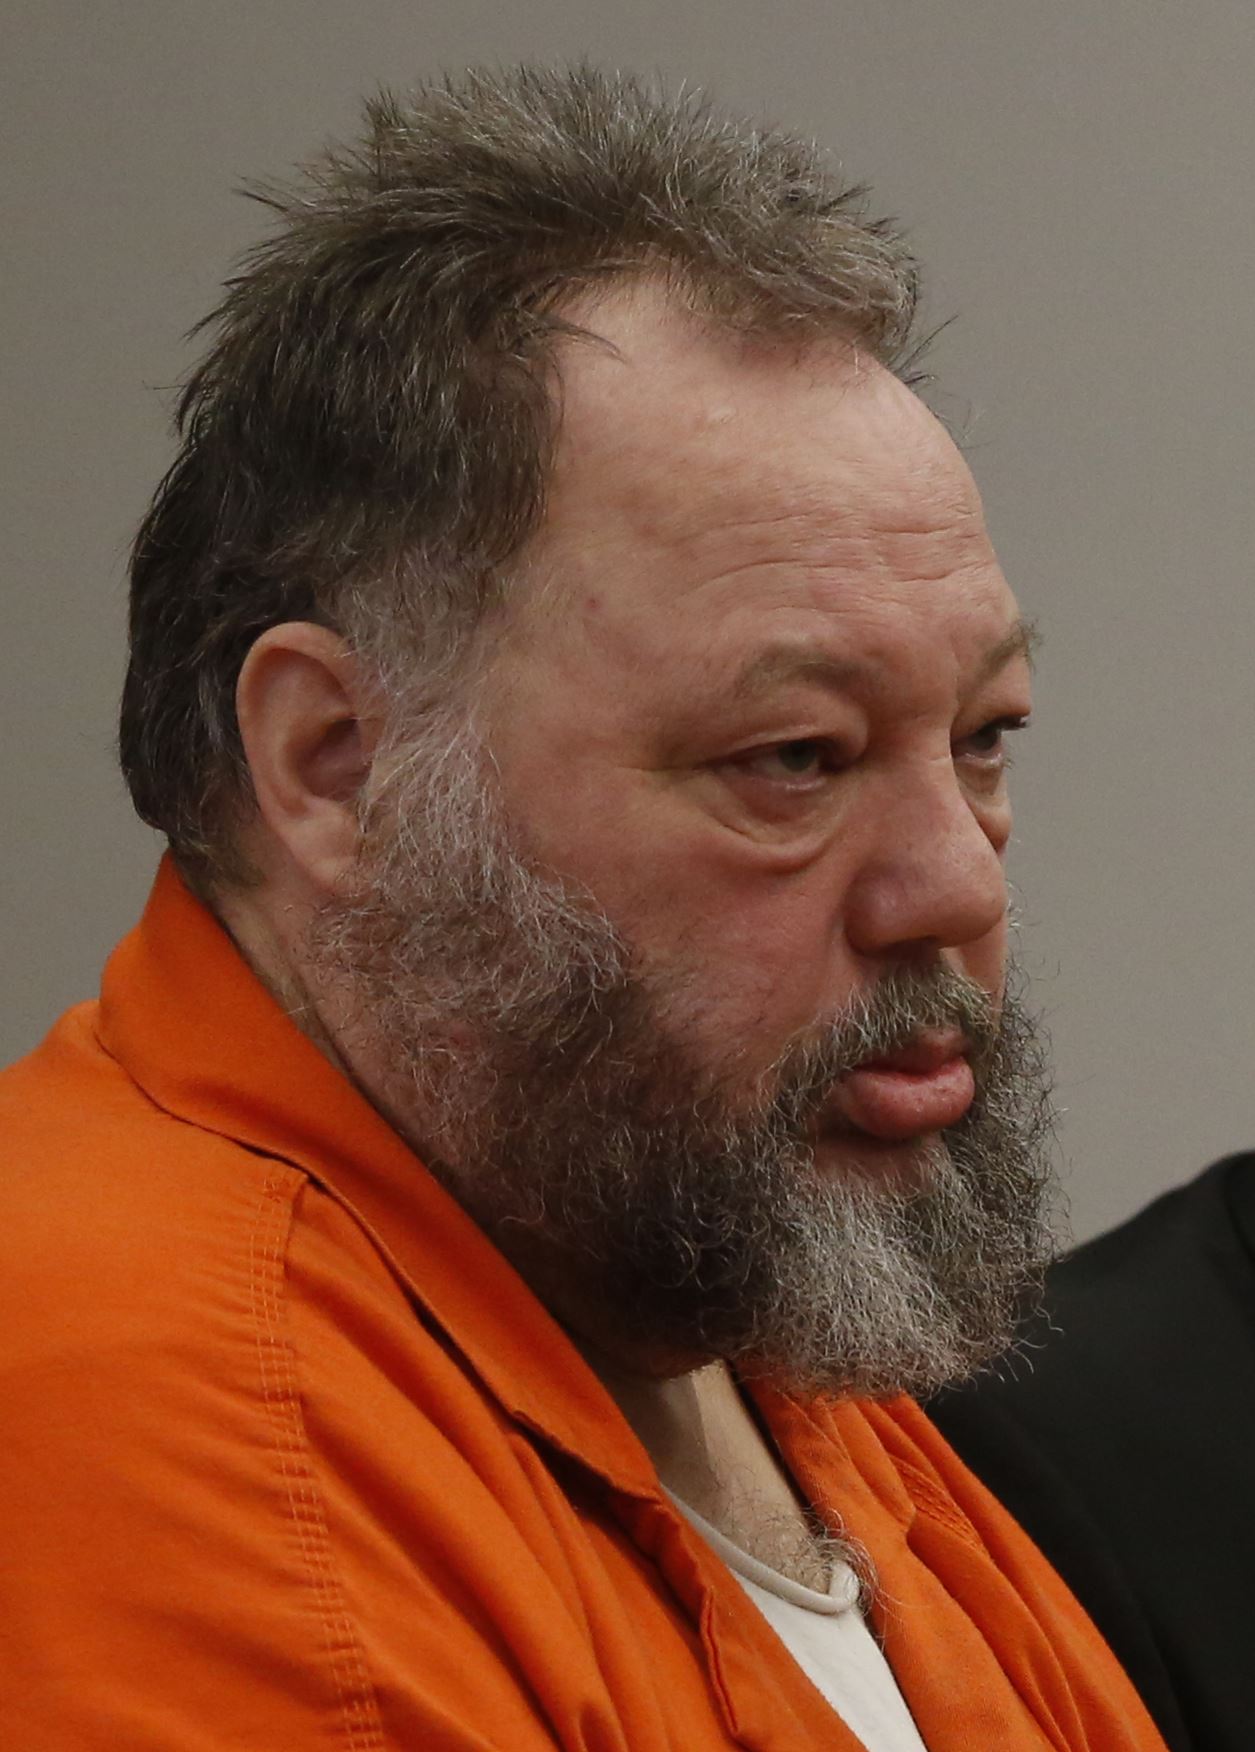 Man gets 15 years in prison for 1983 slaying of Whitehouse woman - The Blade - CTY-gustafson22p-Andrew-Gustafson